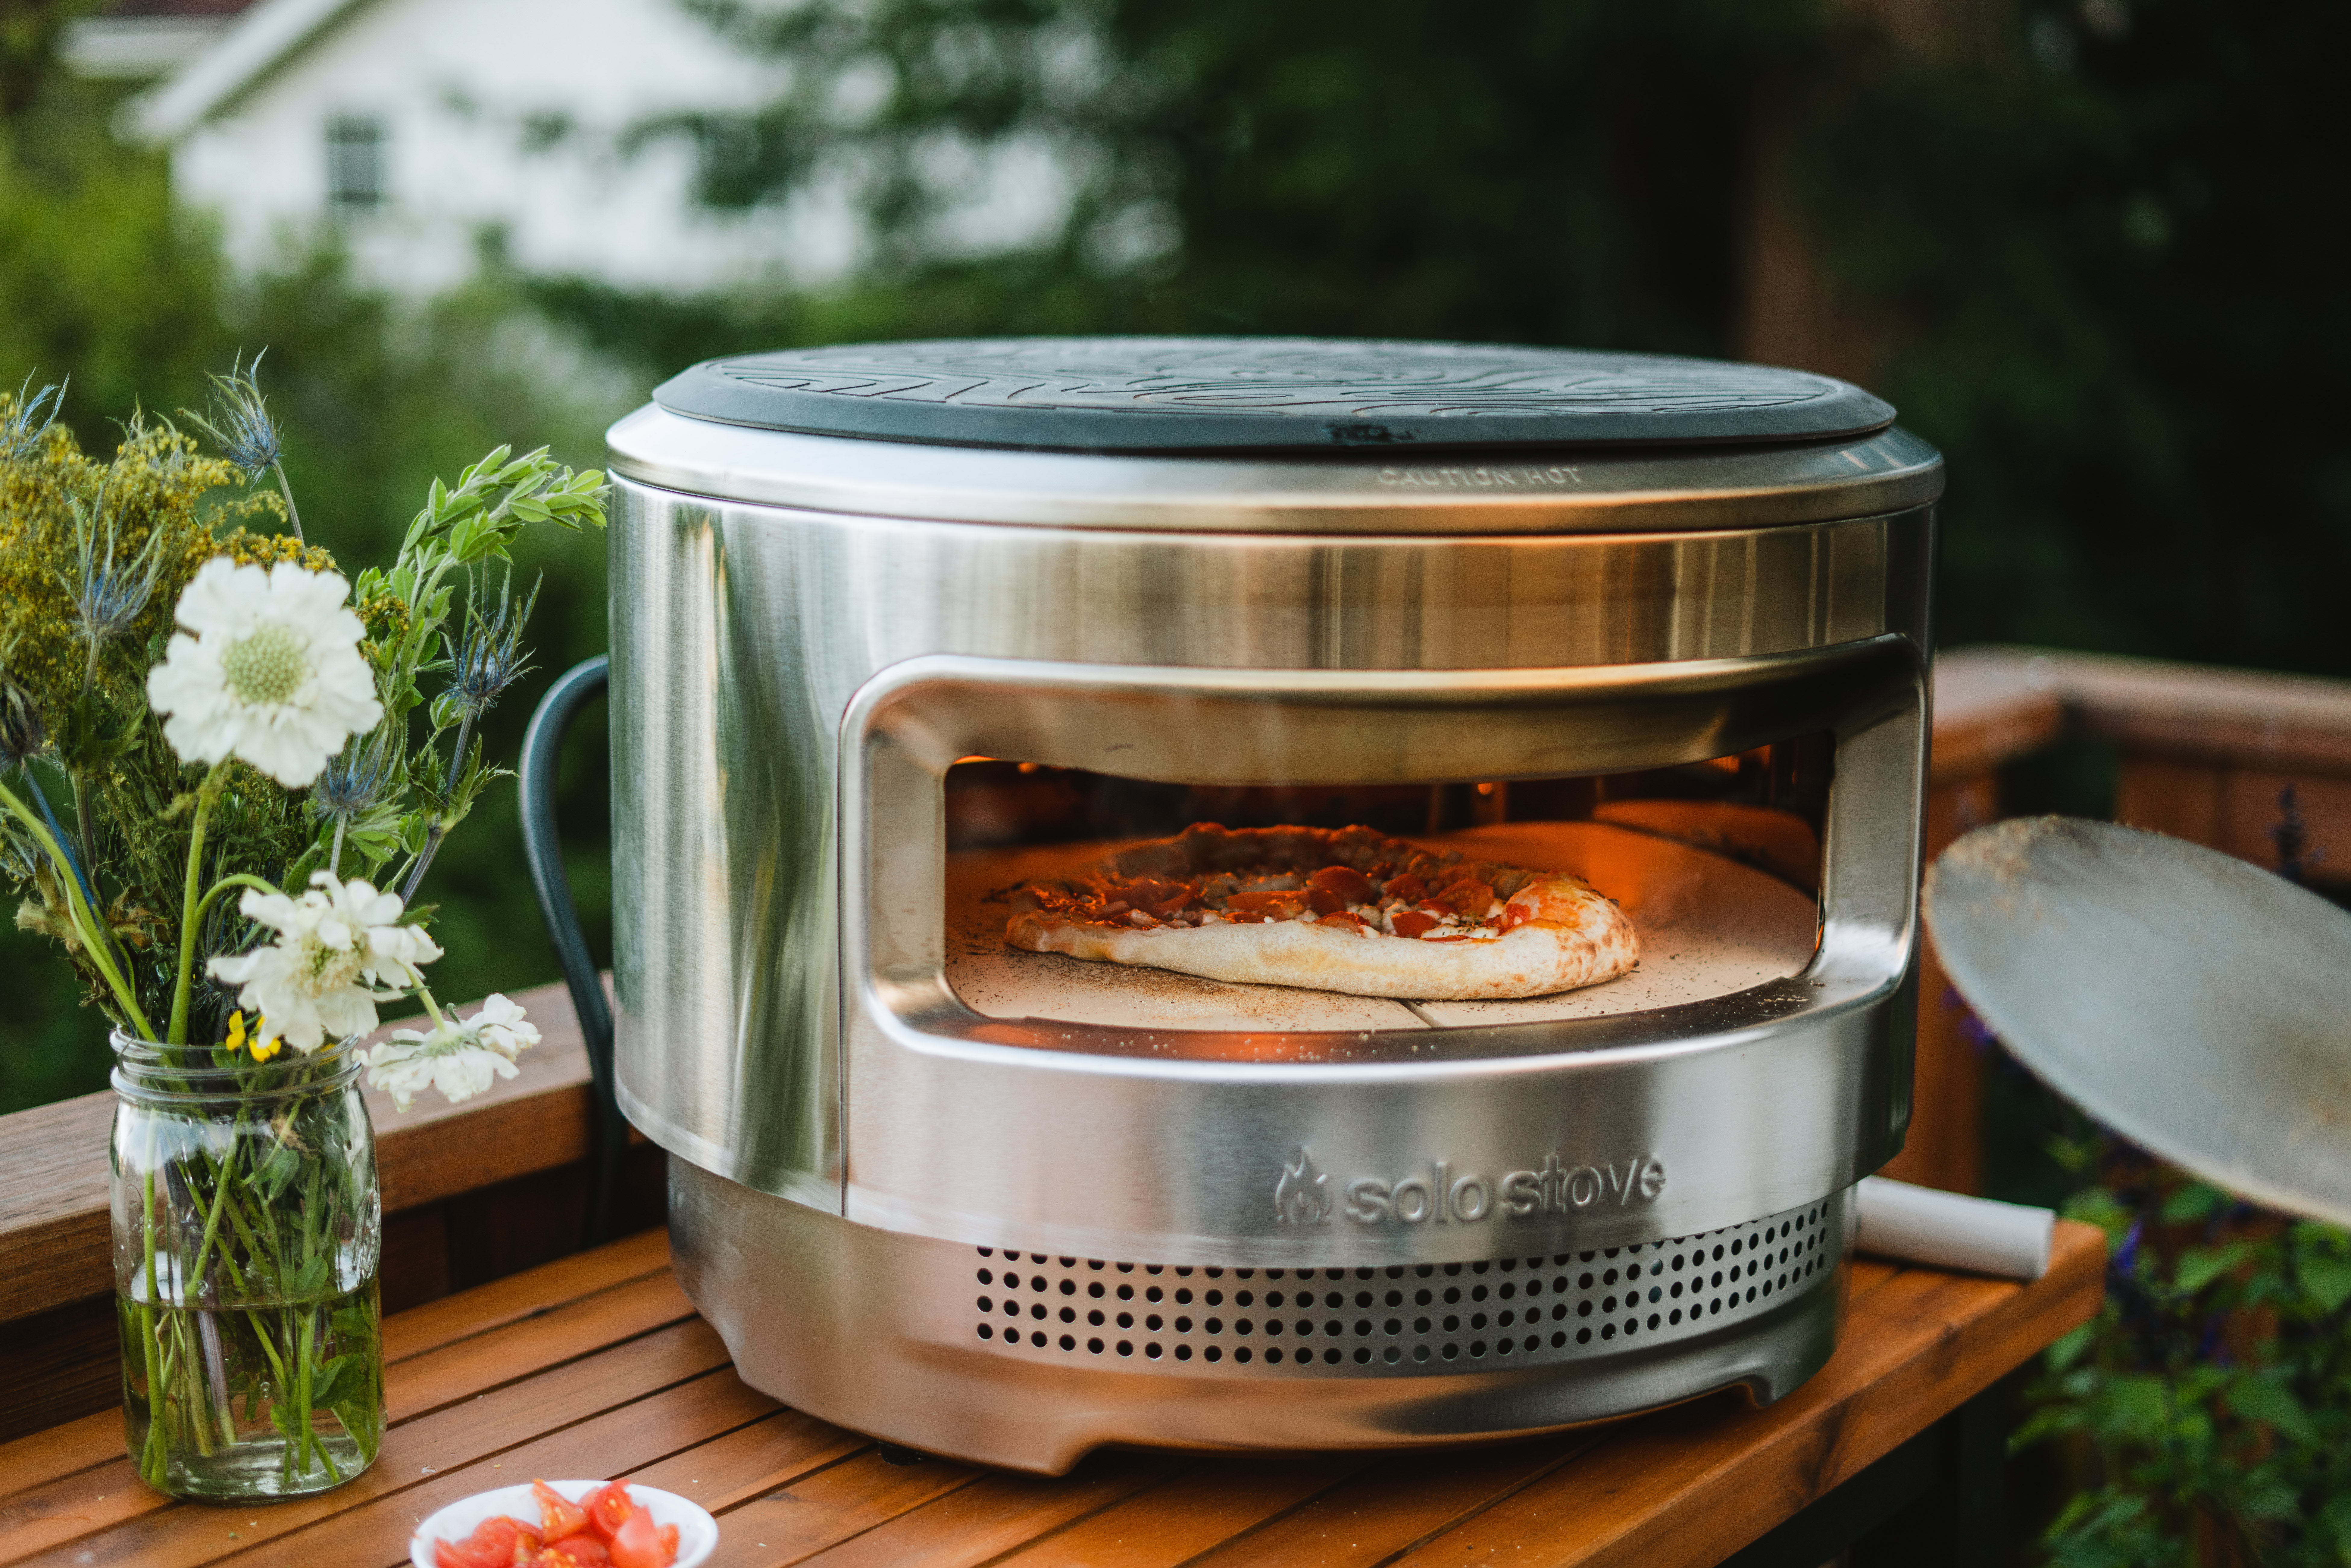 Solo Stove Stainless Steel Freestanding Pizza Oven & Reviews